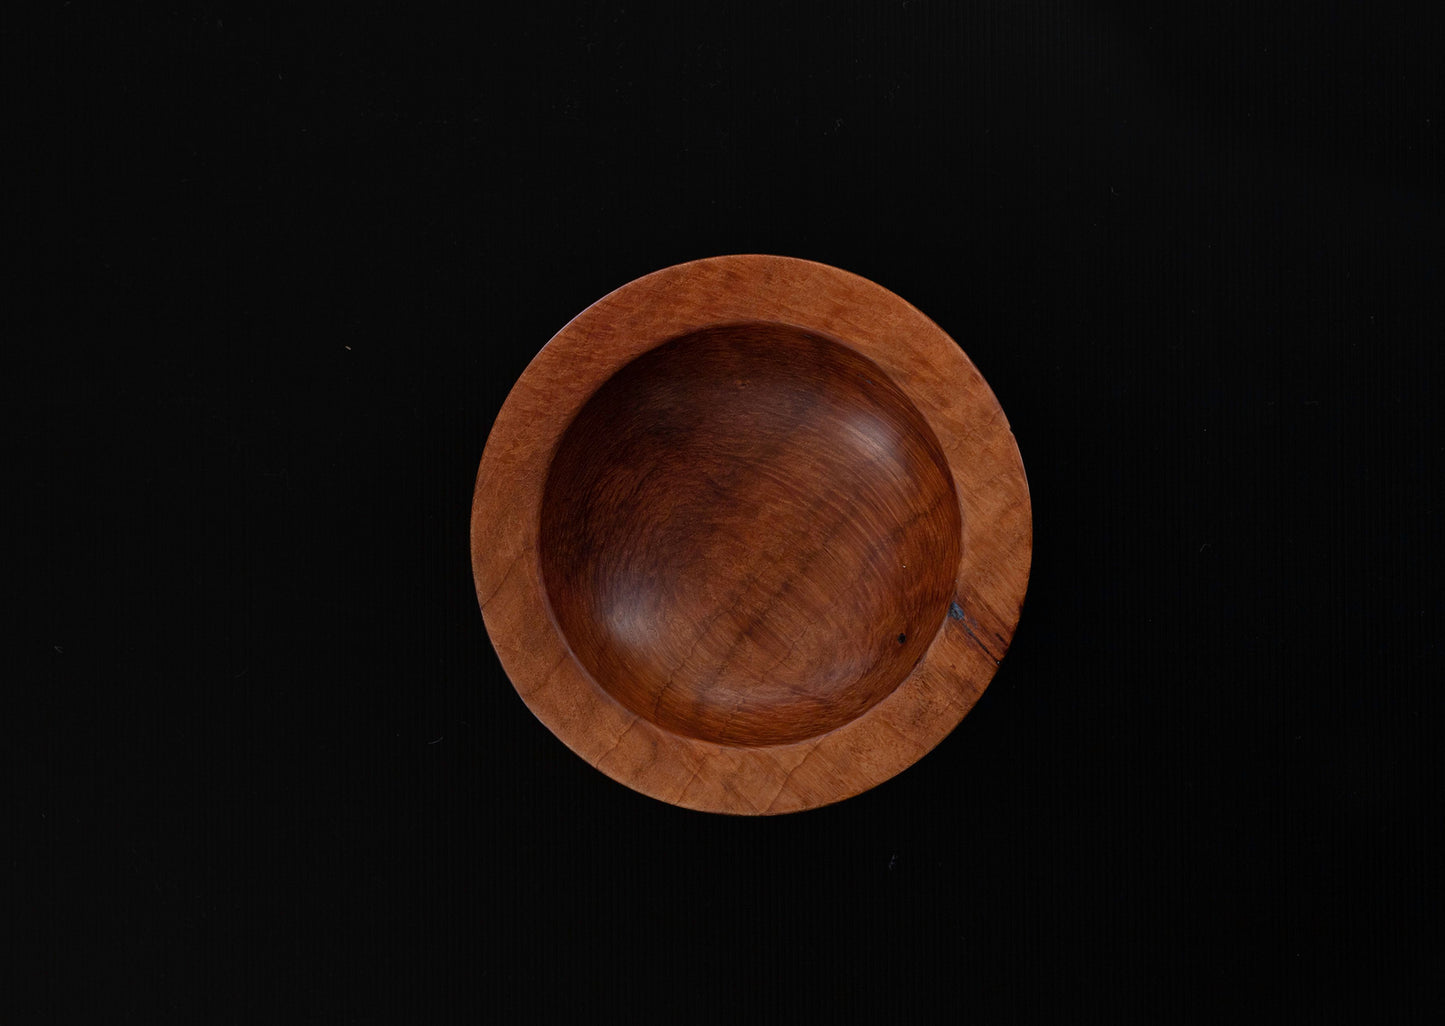 Redwood Burr Wood Bowl by Woodturner Mark Russell No377